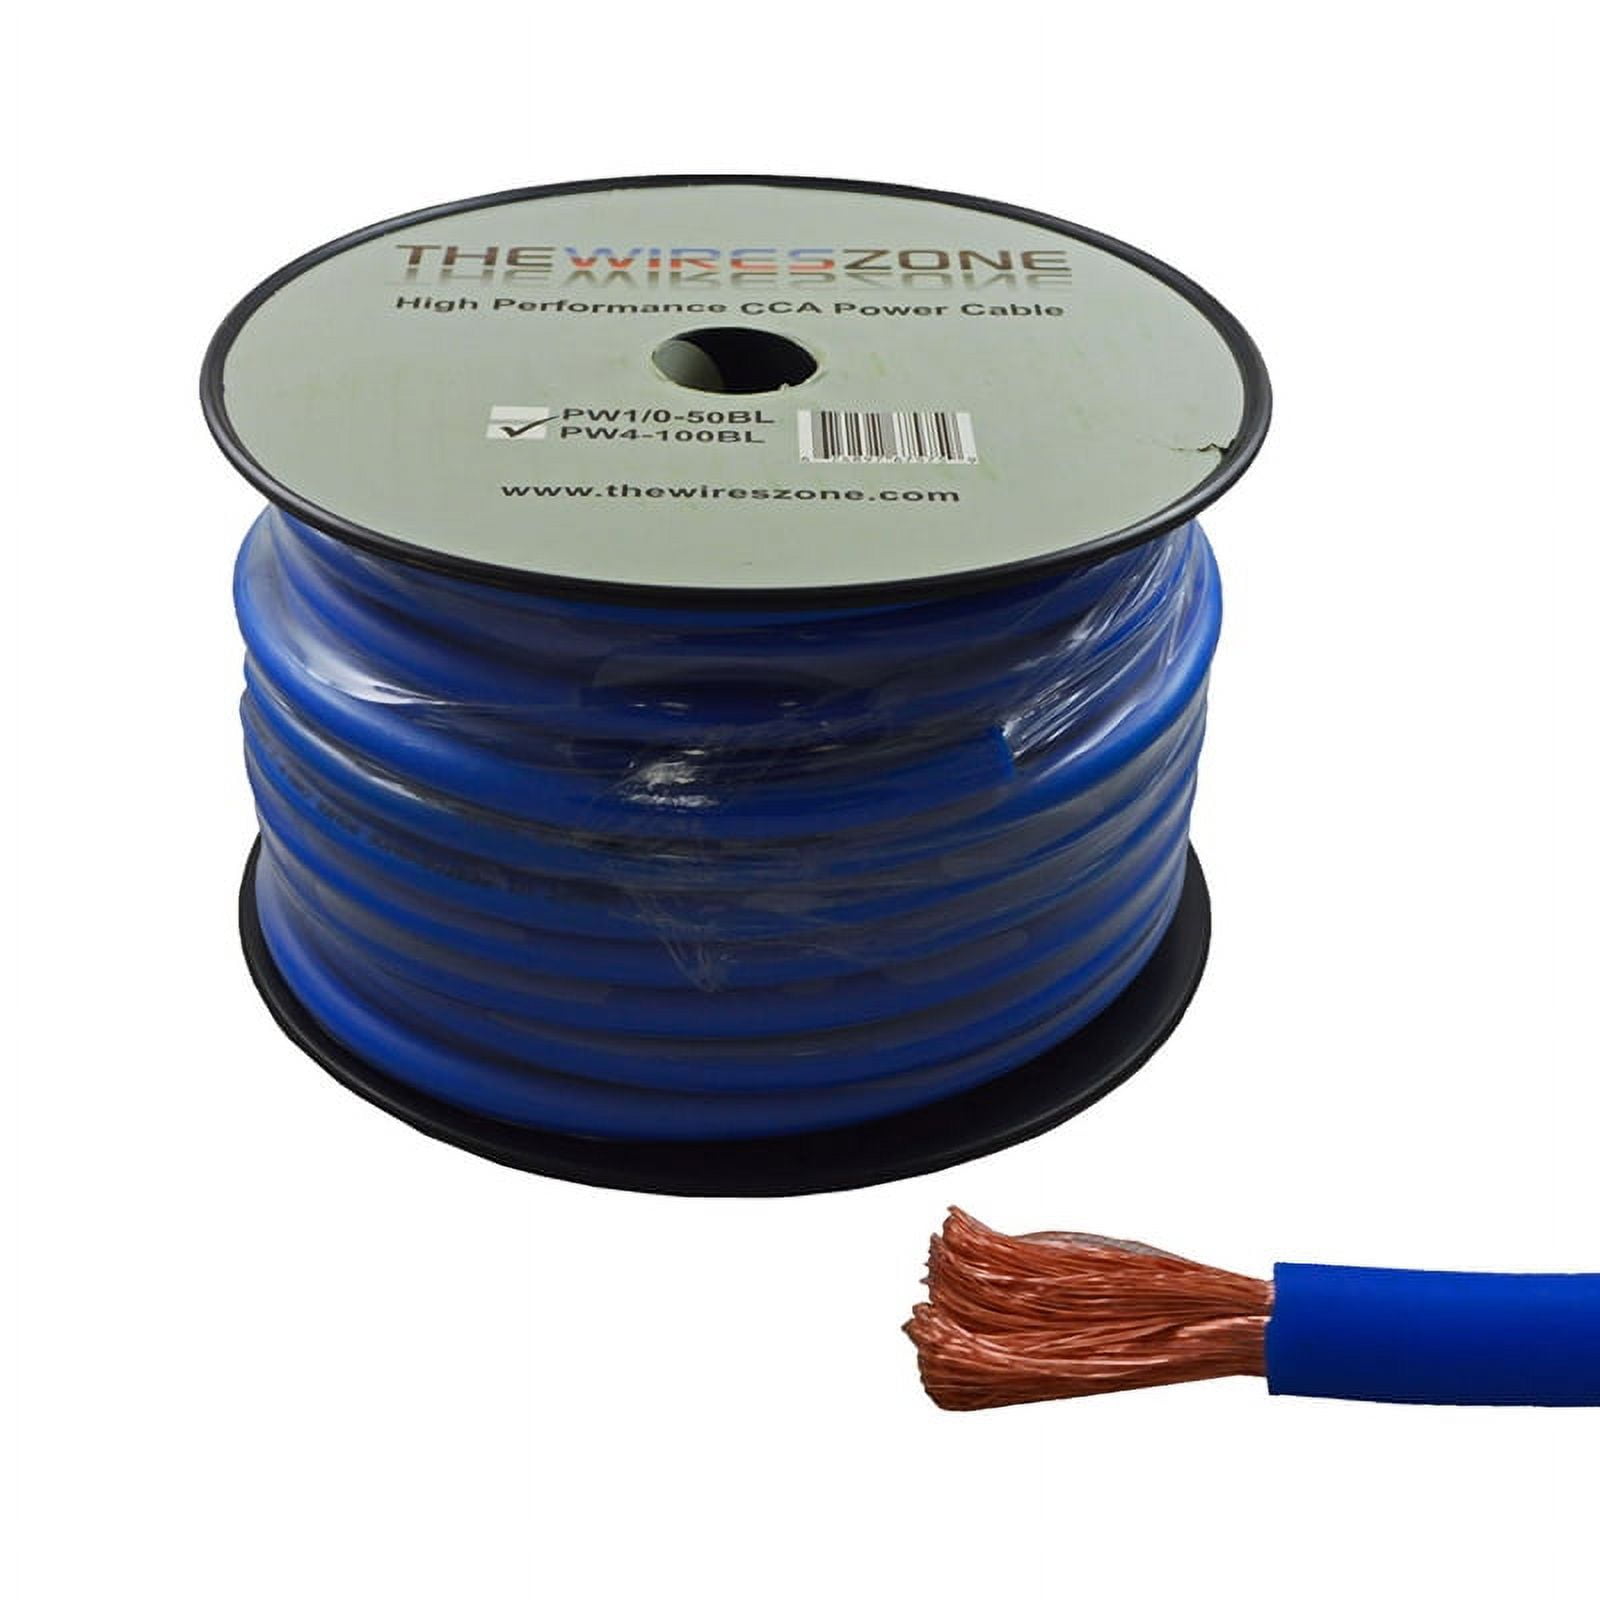 4 Gauge 100 Feet High Performance Flexi Amp Power/Ground Cable 4